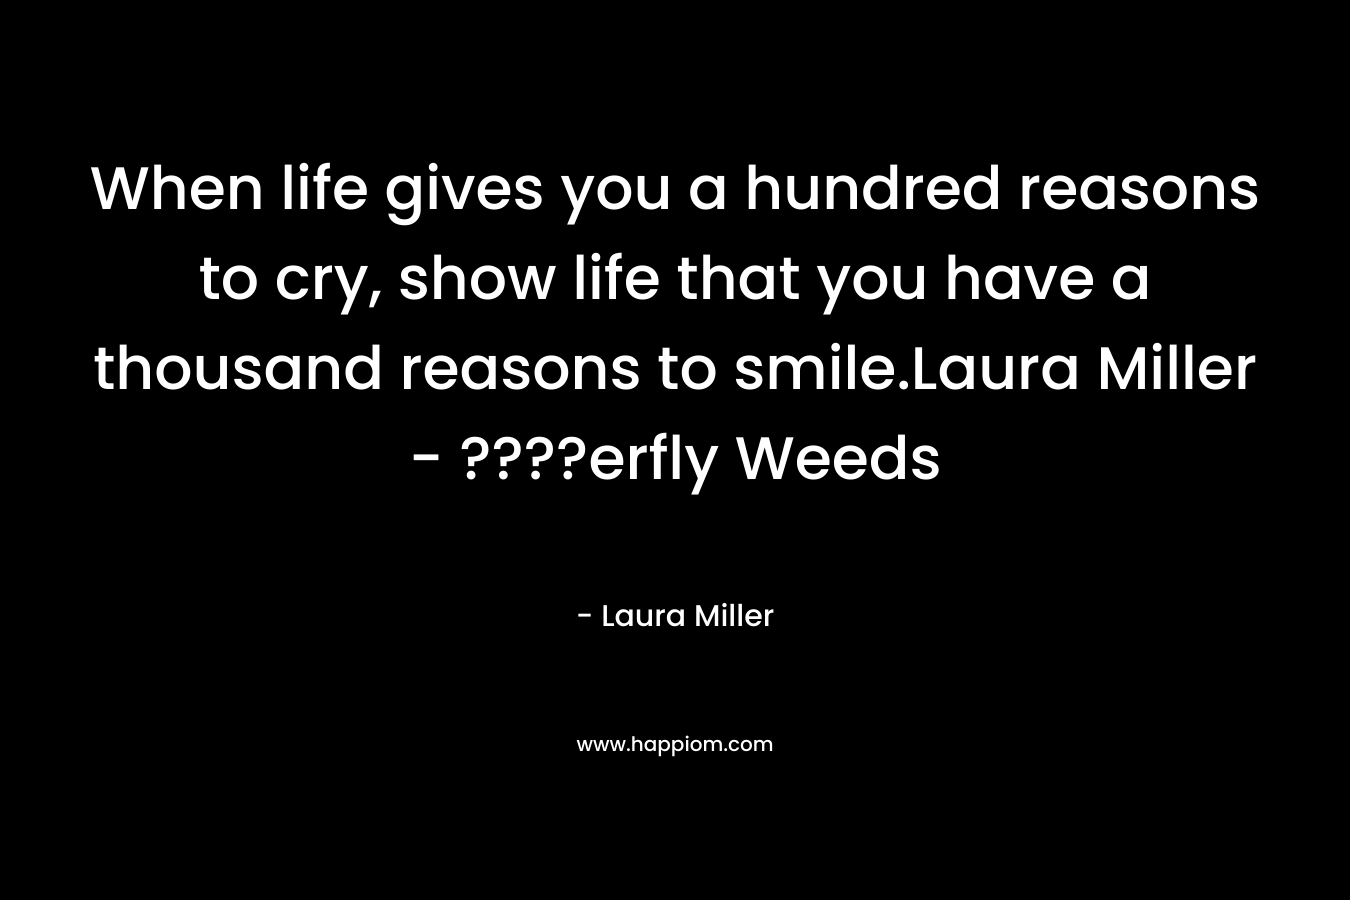 When life gives you a hundred reasons to cry, show life that you have a thousand reasons to smile.Laura Miller - ????erfly Weeds